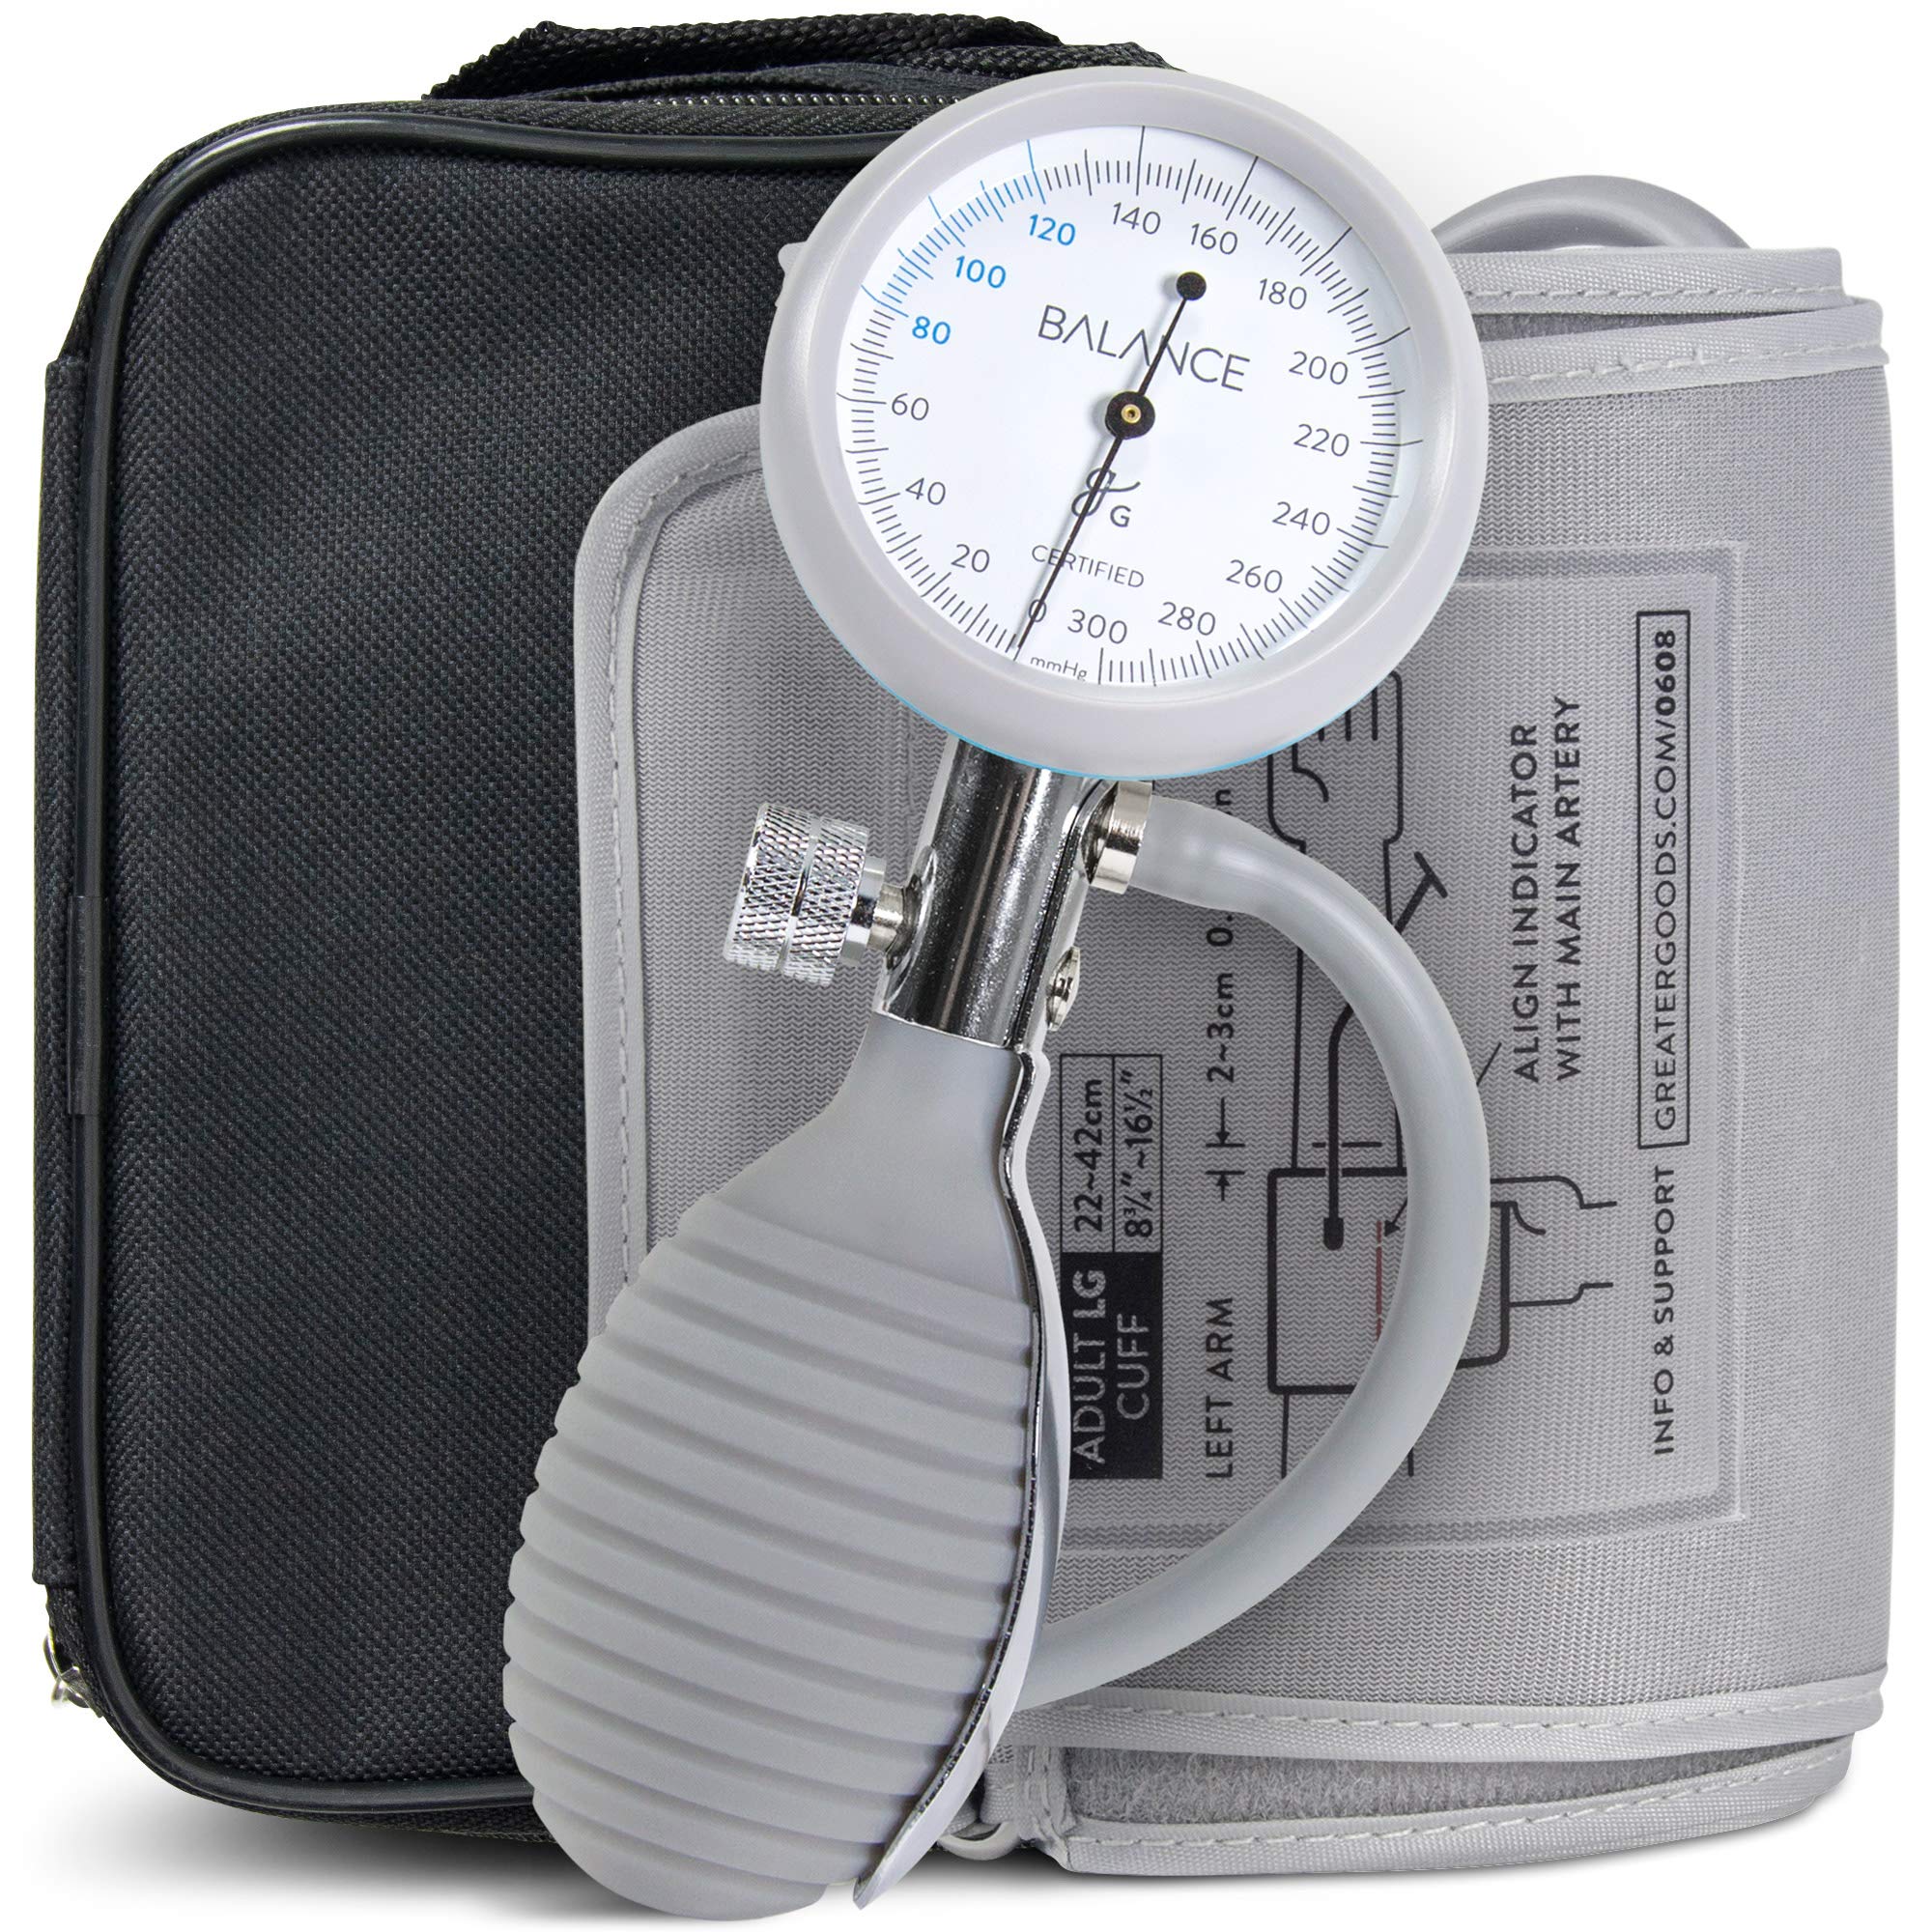 For Checking Blood Pressure at Home, Basic Cuffs Are Just as Good